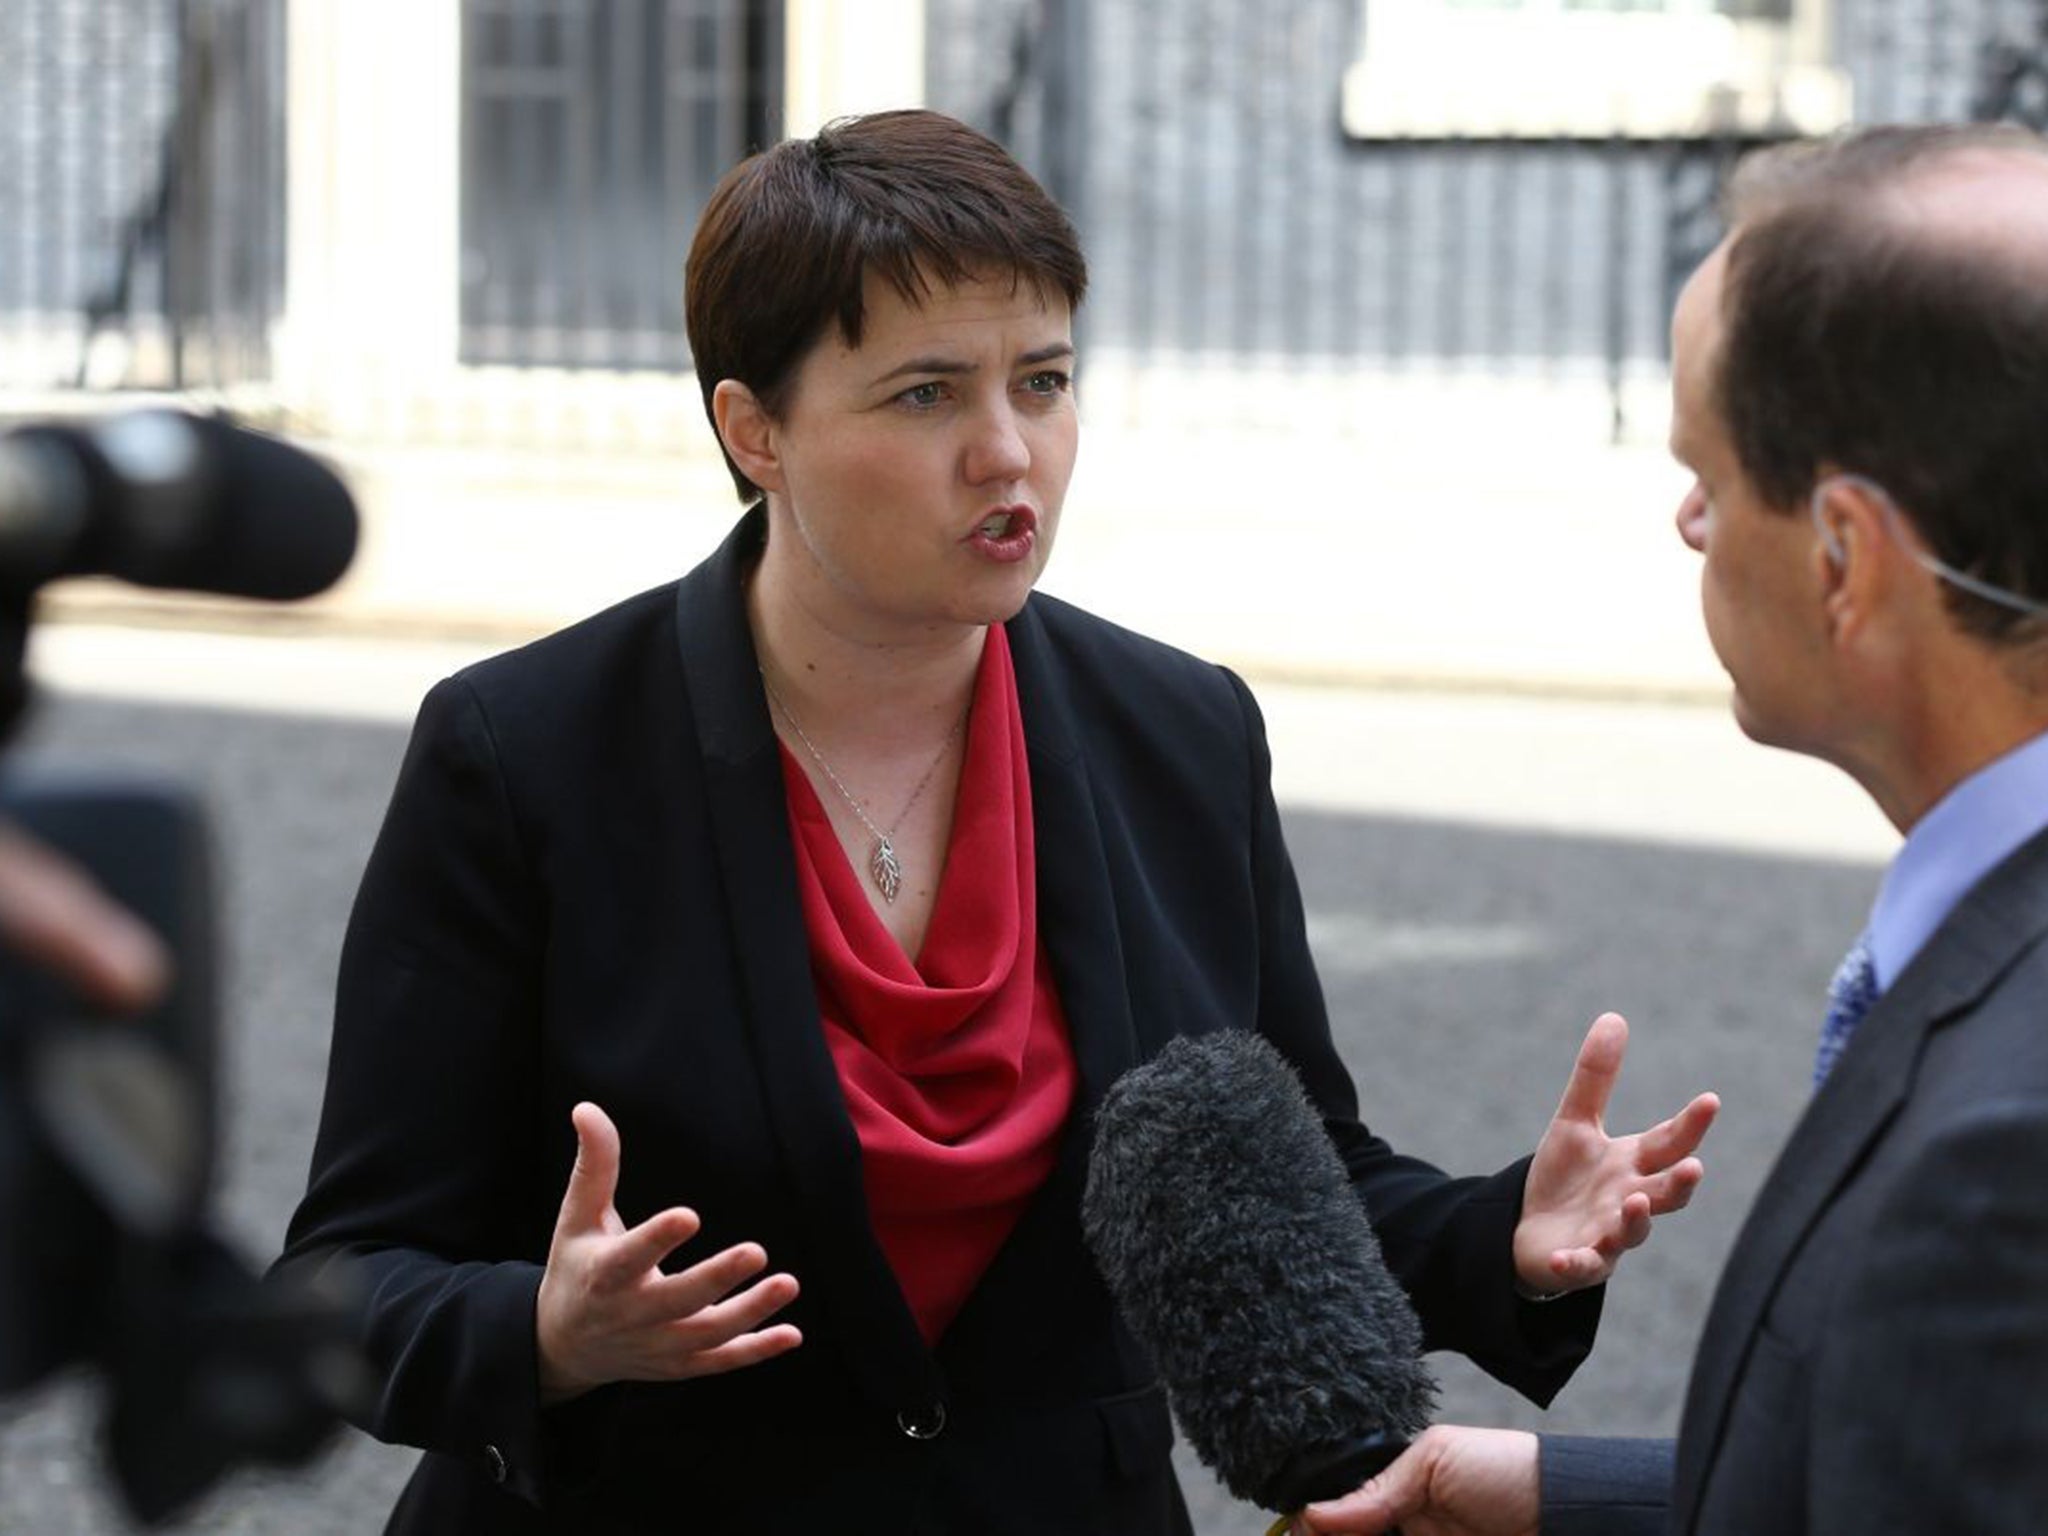 Ruth Davidson has been the leader of the Scottish Conservatives for more than five years